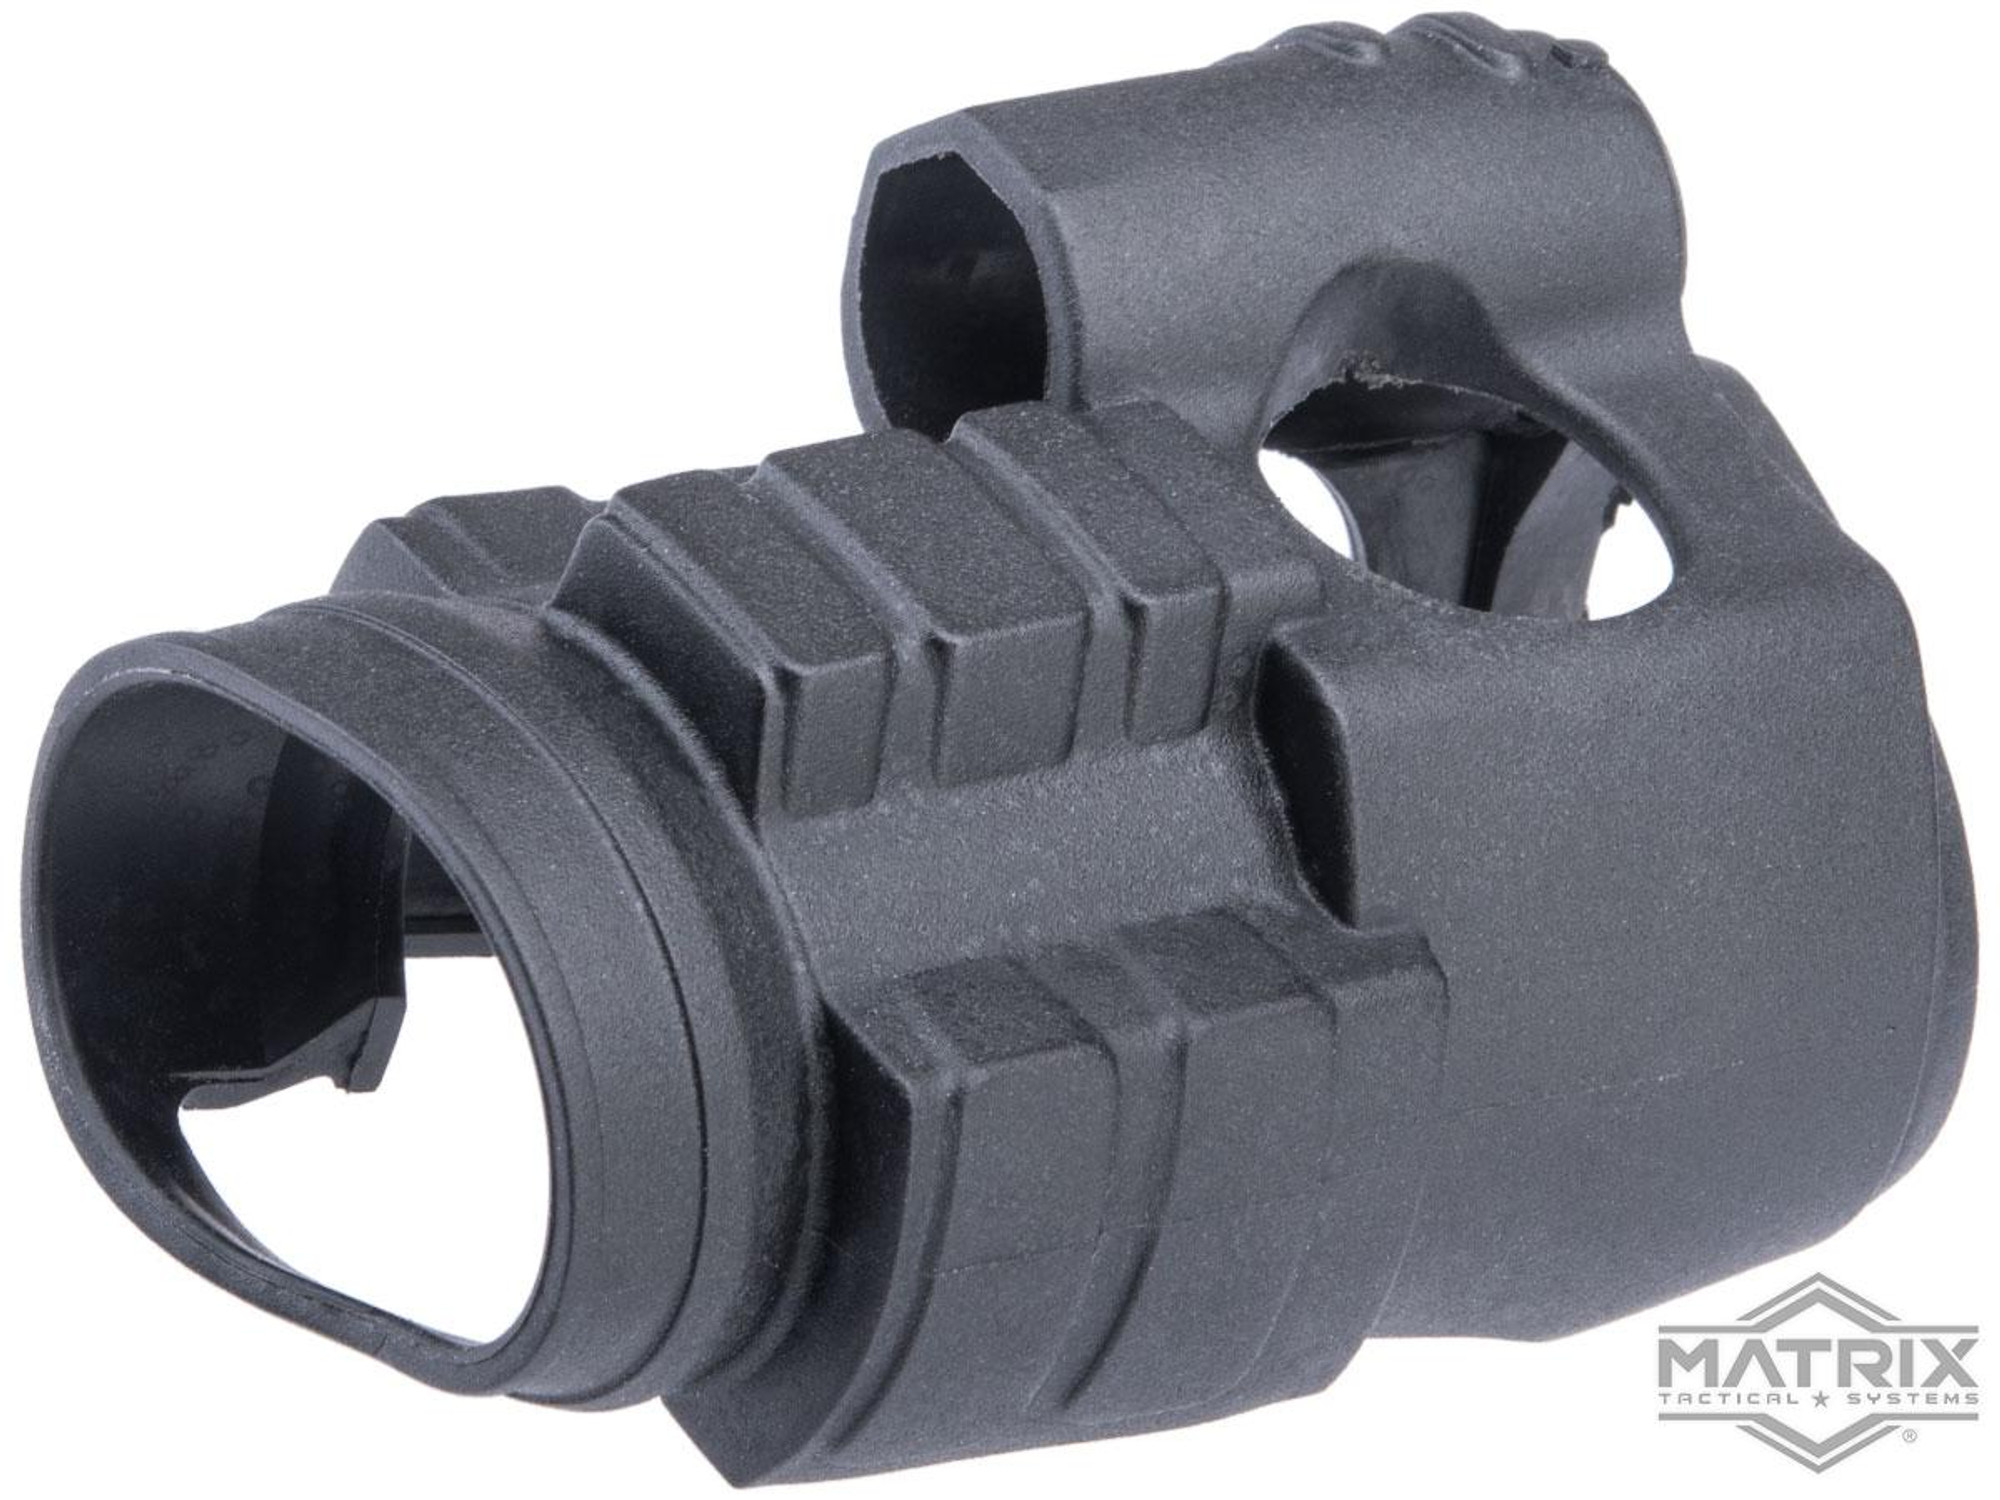 Matrix 30mm Red Dot Airsoft Sight Rubber Cover - Black